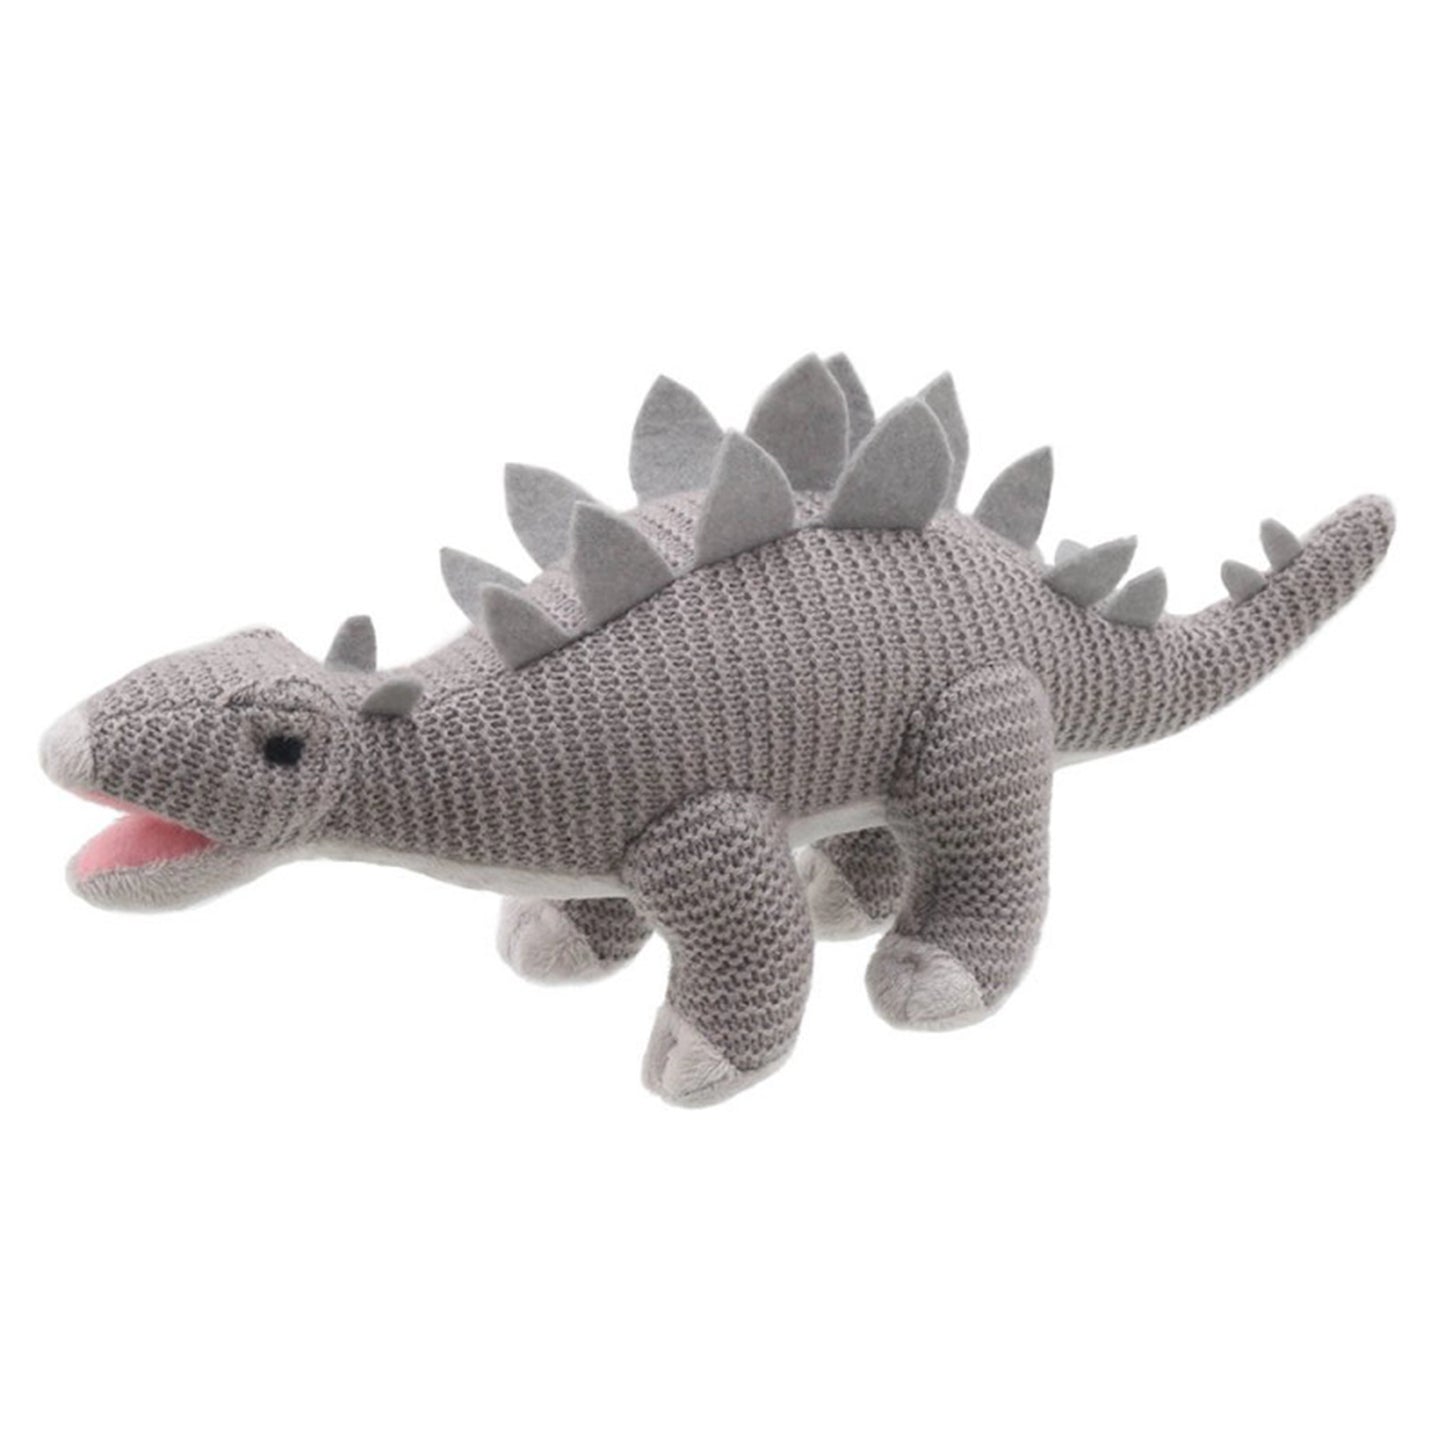 Wilberry Knitted - Stegosaurus - Wilberry Toys - The Forgotten Toy Shop